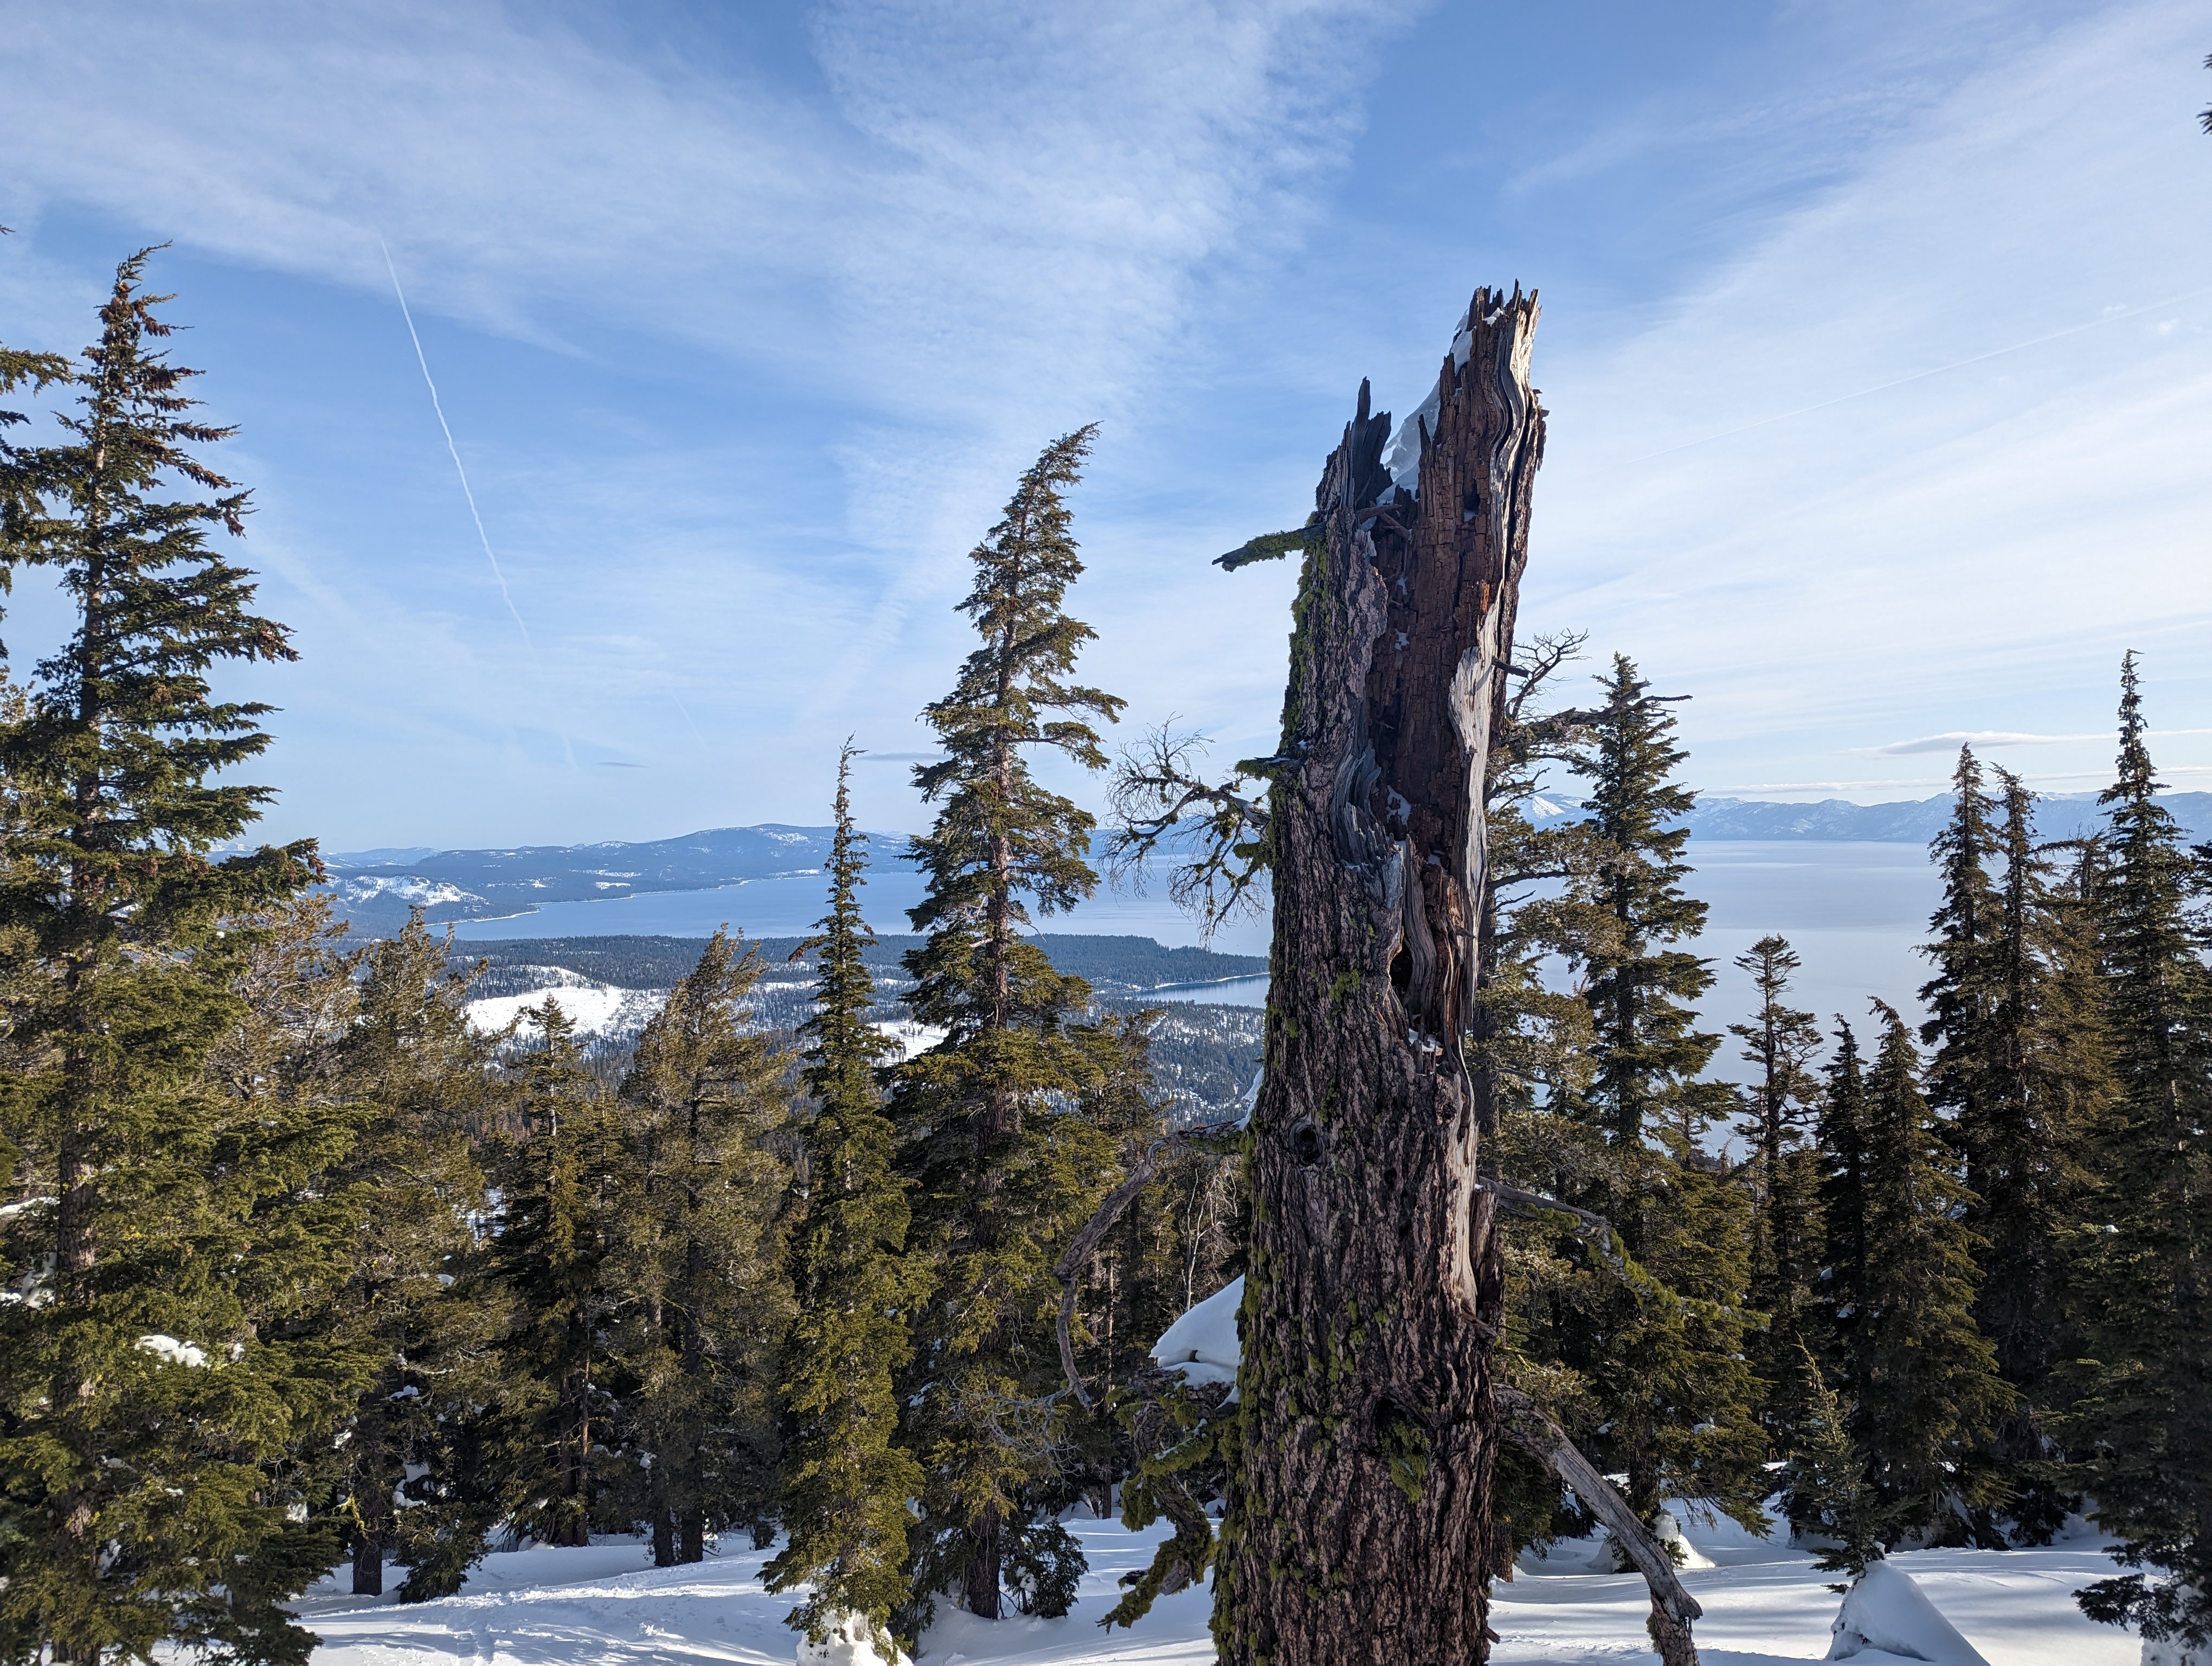 The view of Tahoe from somewhere near where I lost the skin track